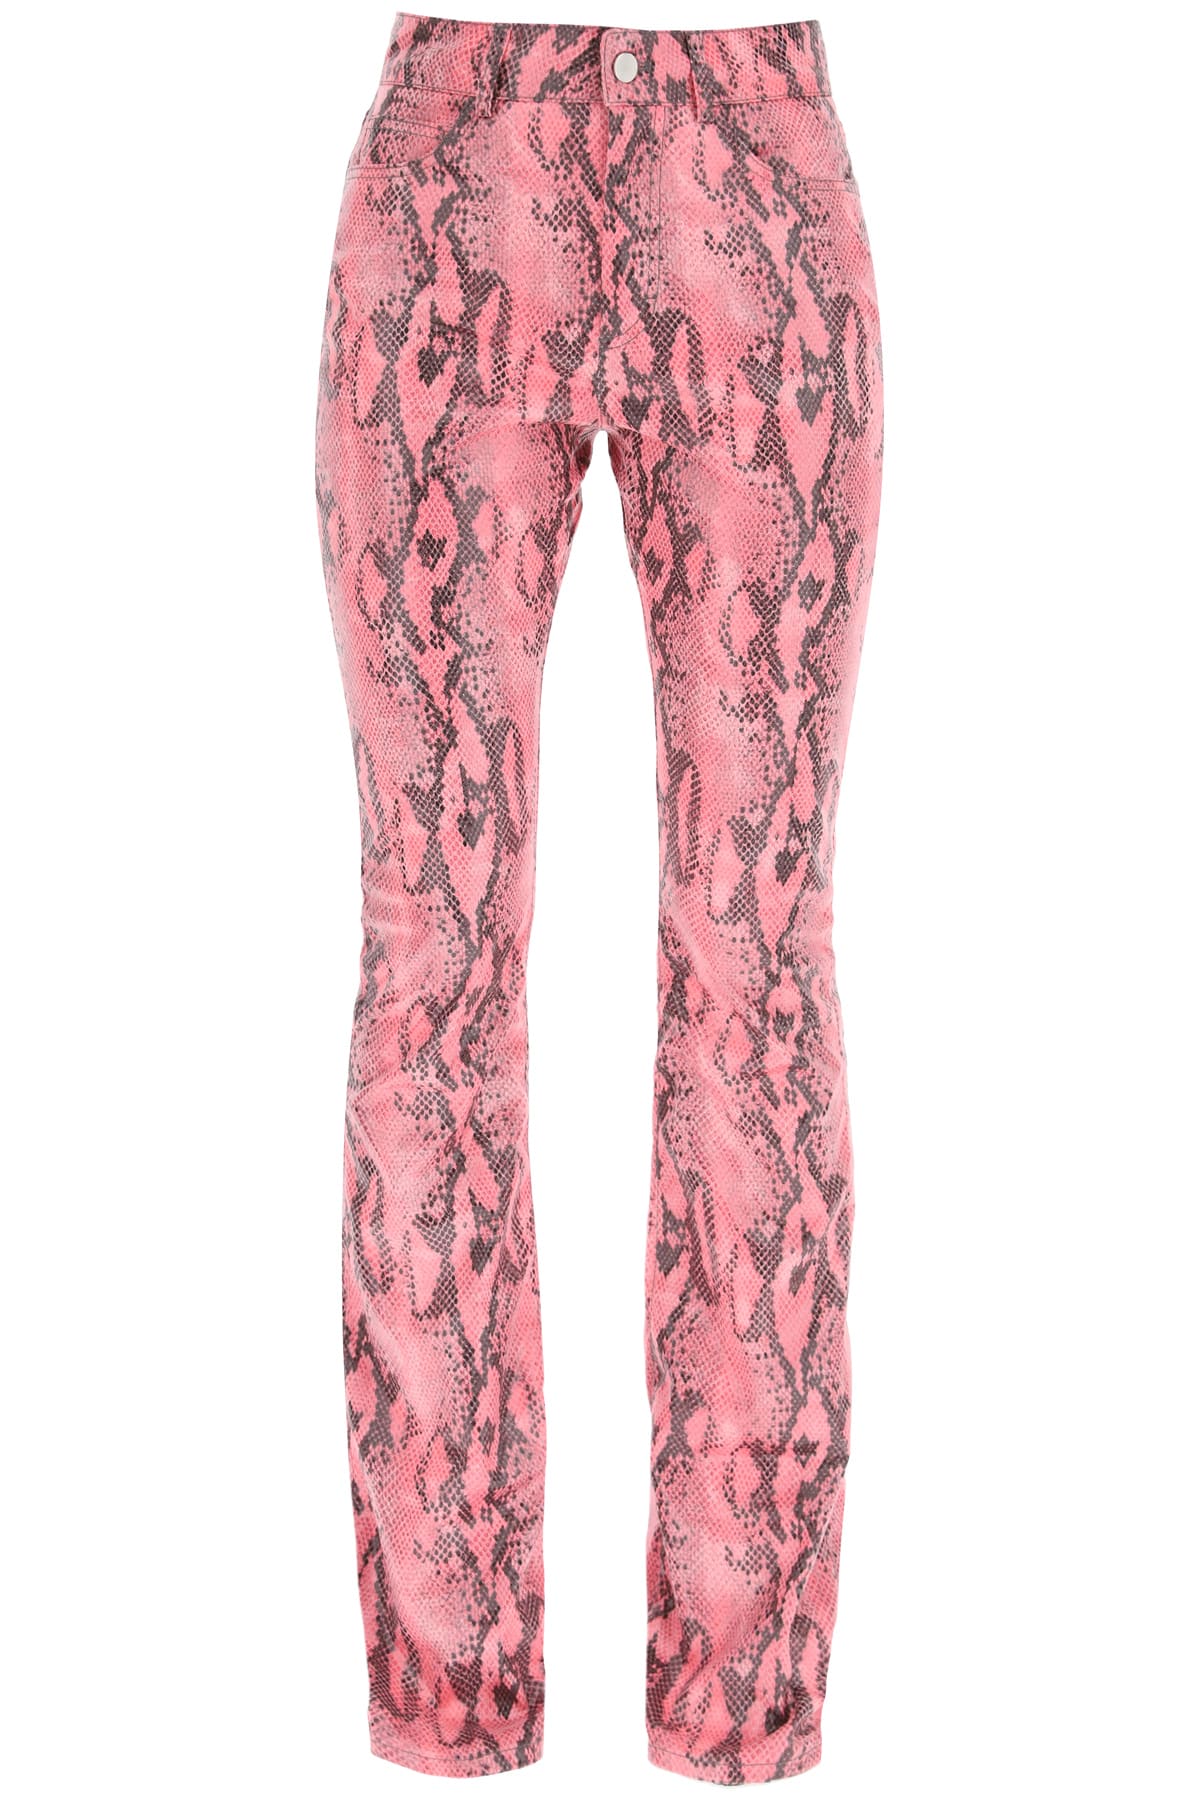 Alessandra Rich Python Flare Trousers